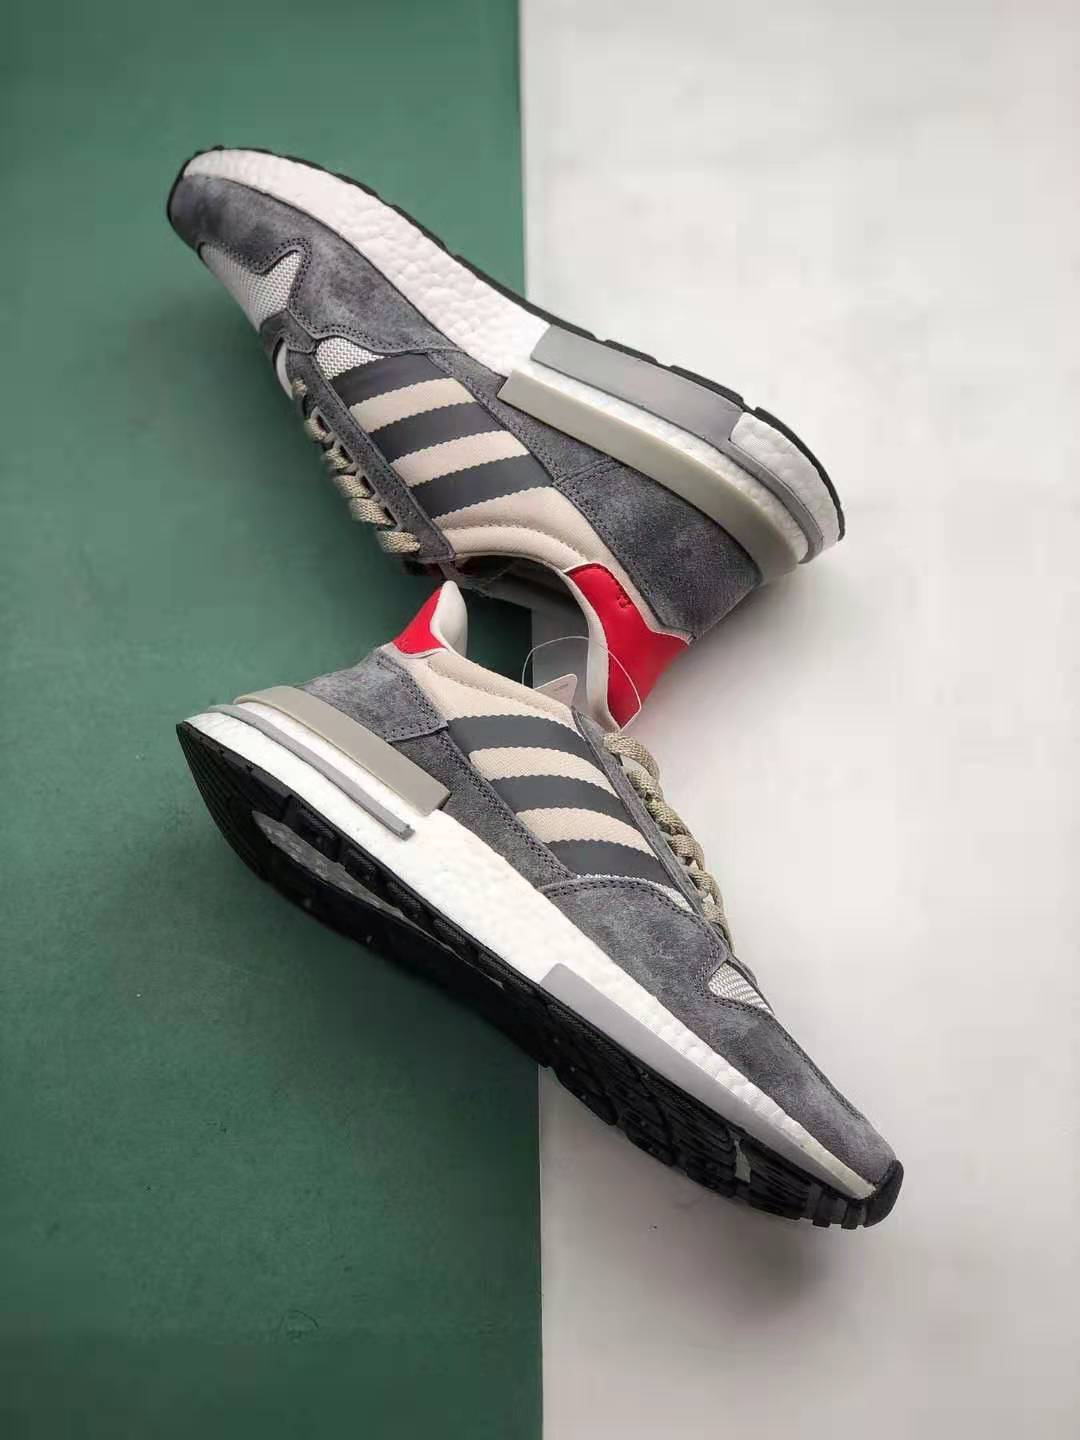 Adidas ZX 500 Boost 'Grey' B42204 - Superior Comfort and Style